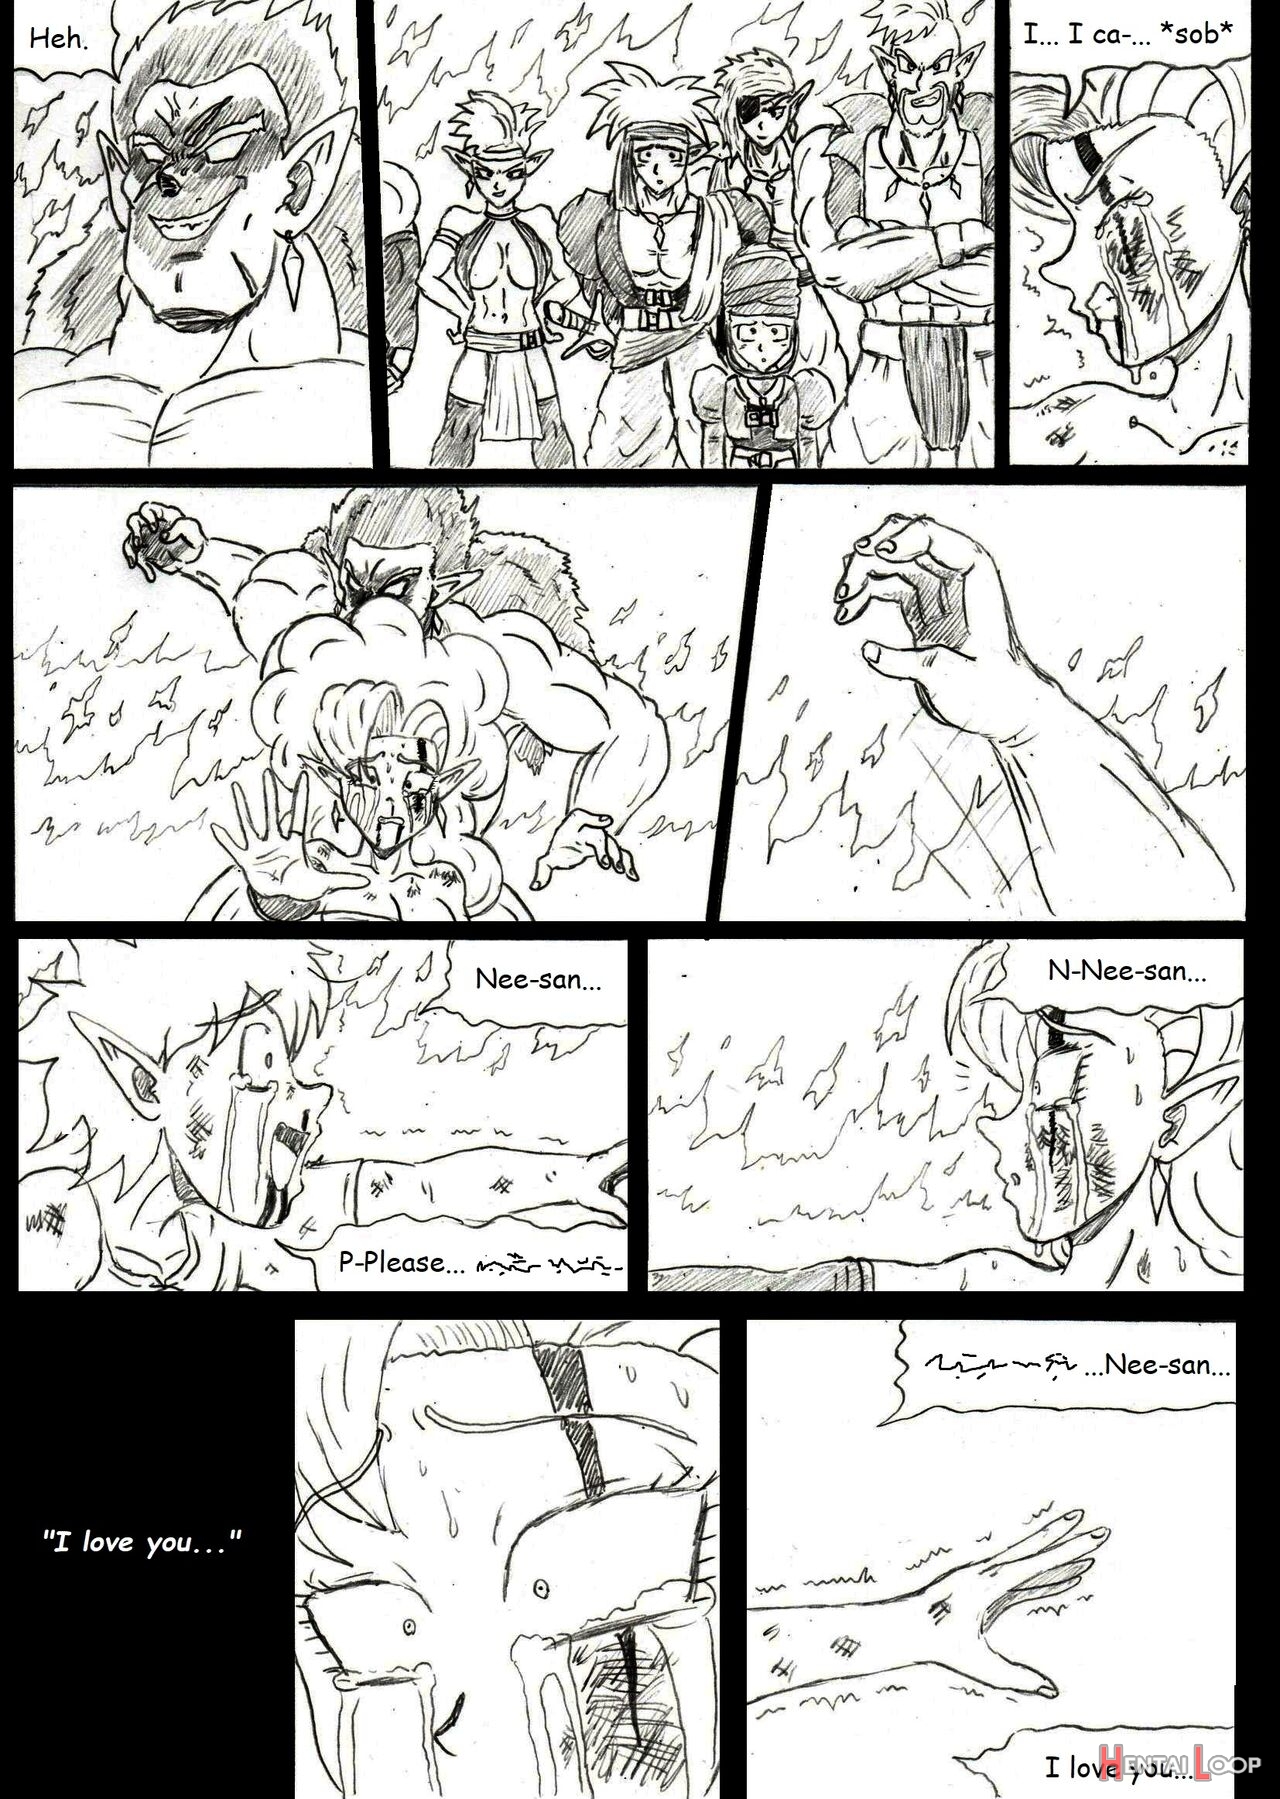 Dragonball Z Golden Age - Chapter 4 - The Galaxy Soldiers page 8